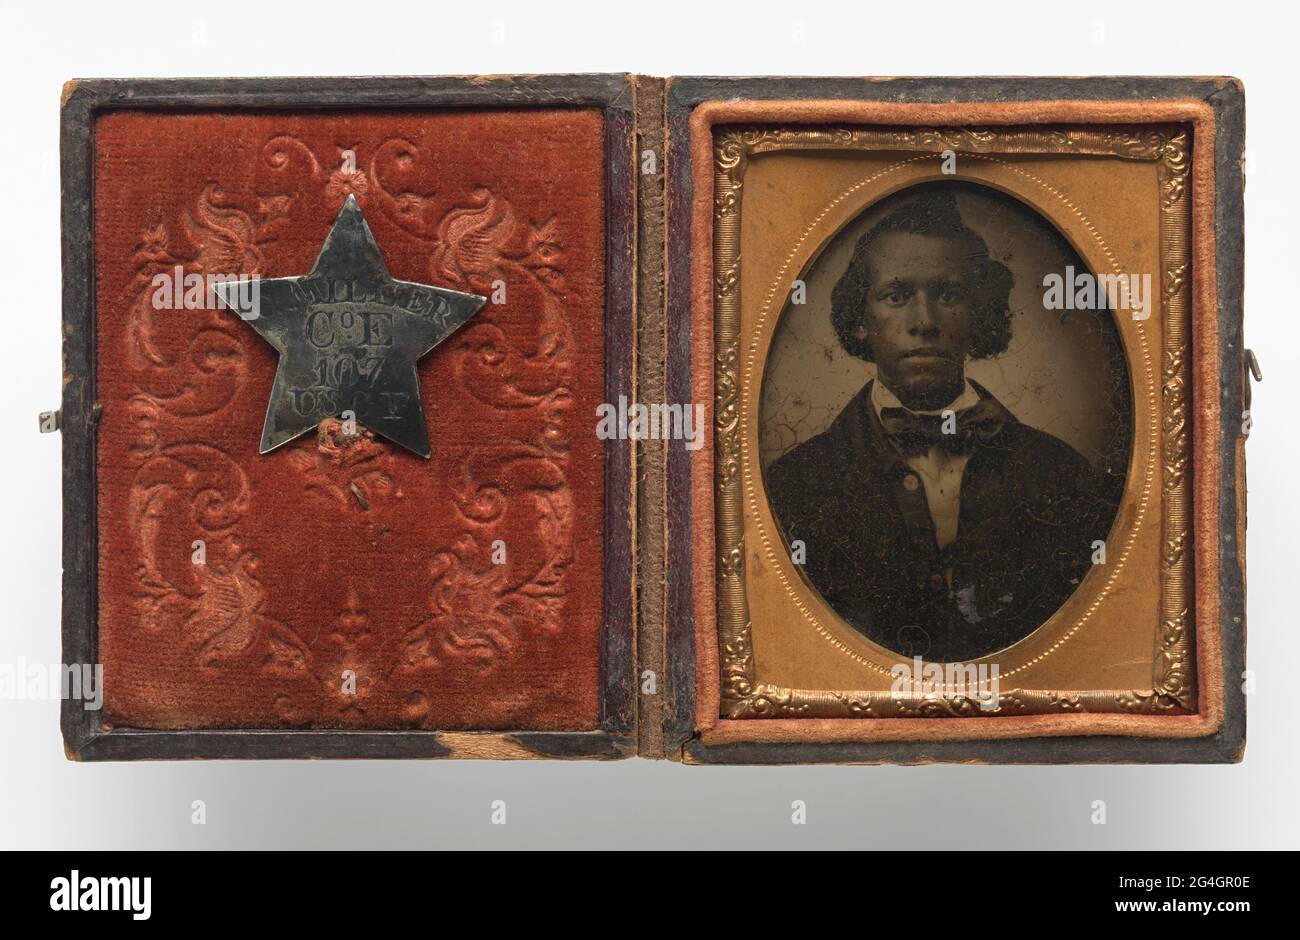 Tintype of Creed Miller, an African American soldier belonging to the Kentucky 107th Regiment, Company E (and later Company C). The tintype is encased in a copper scrolled frame with an oval window within a red velvet-lined, brown leather box. The tintype depicts Creed from the waist up in a dark overcoat, white collared shirt and bow-tie. His hair is styled and parted to the side. His miltary identification pin is fastened to the red velvet fabric on the interior of the case. The pin is a silver five pointed star with &quot;C. MILLER/ Co. E/ 107/ USCT&quot; engraved at center. The front and b Stock Photo